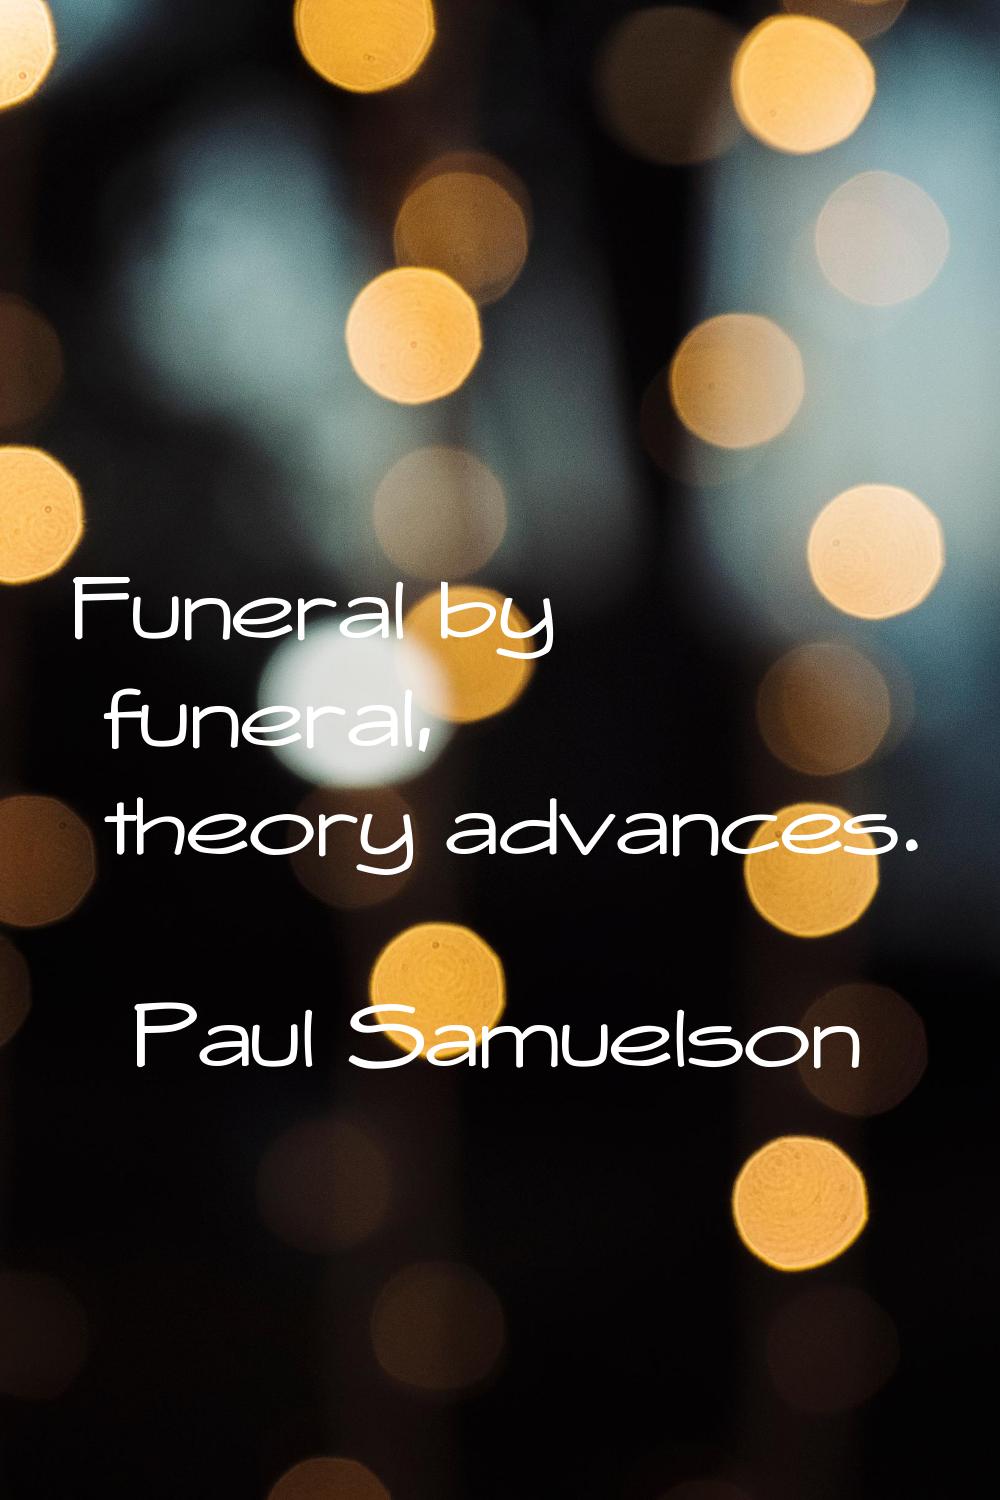 Funeral by funeral, theory advances.